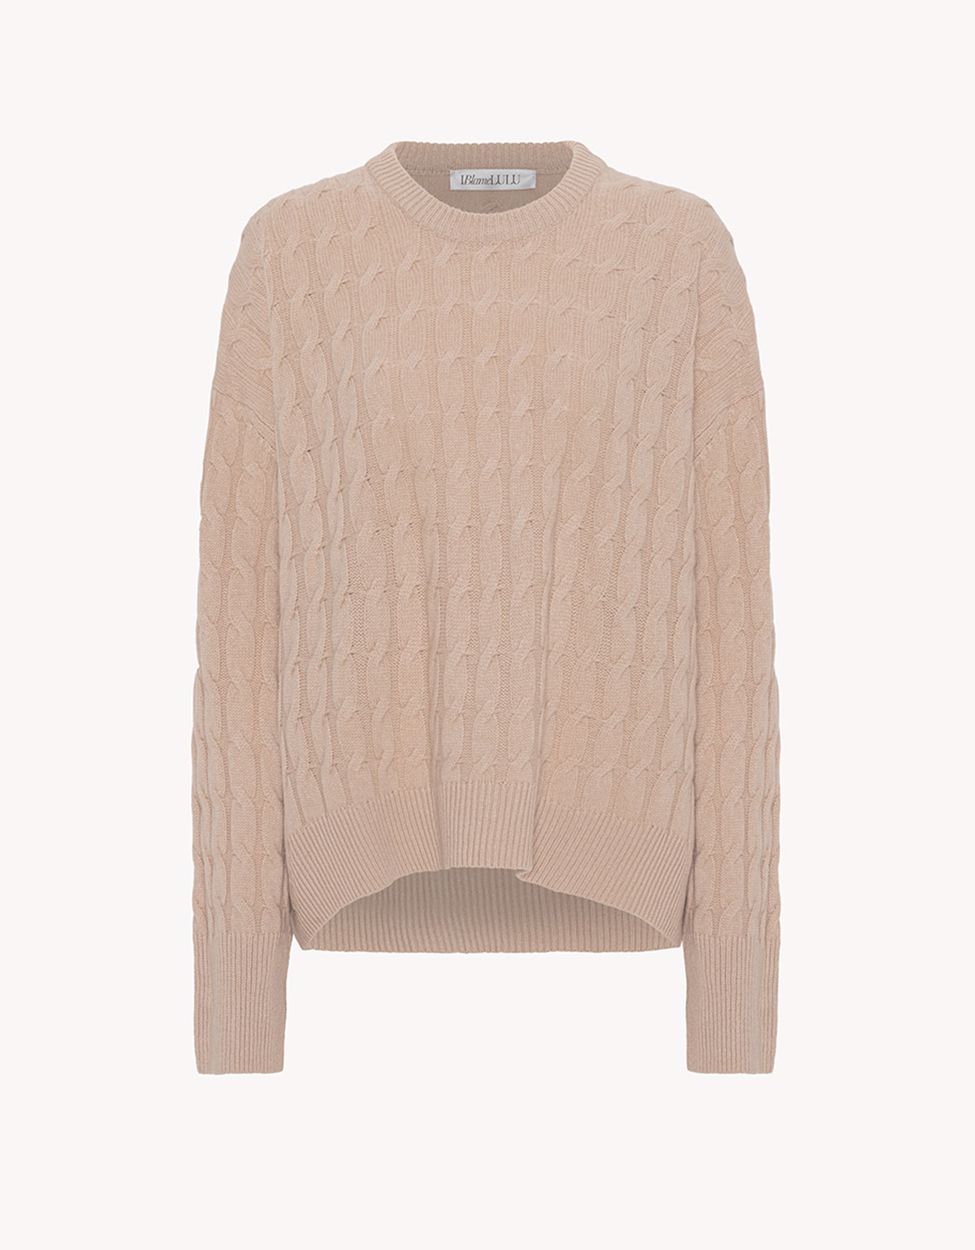 Carmen Cable Knit - Fawn